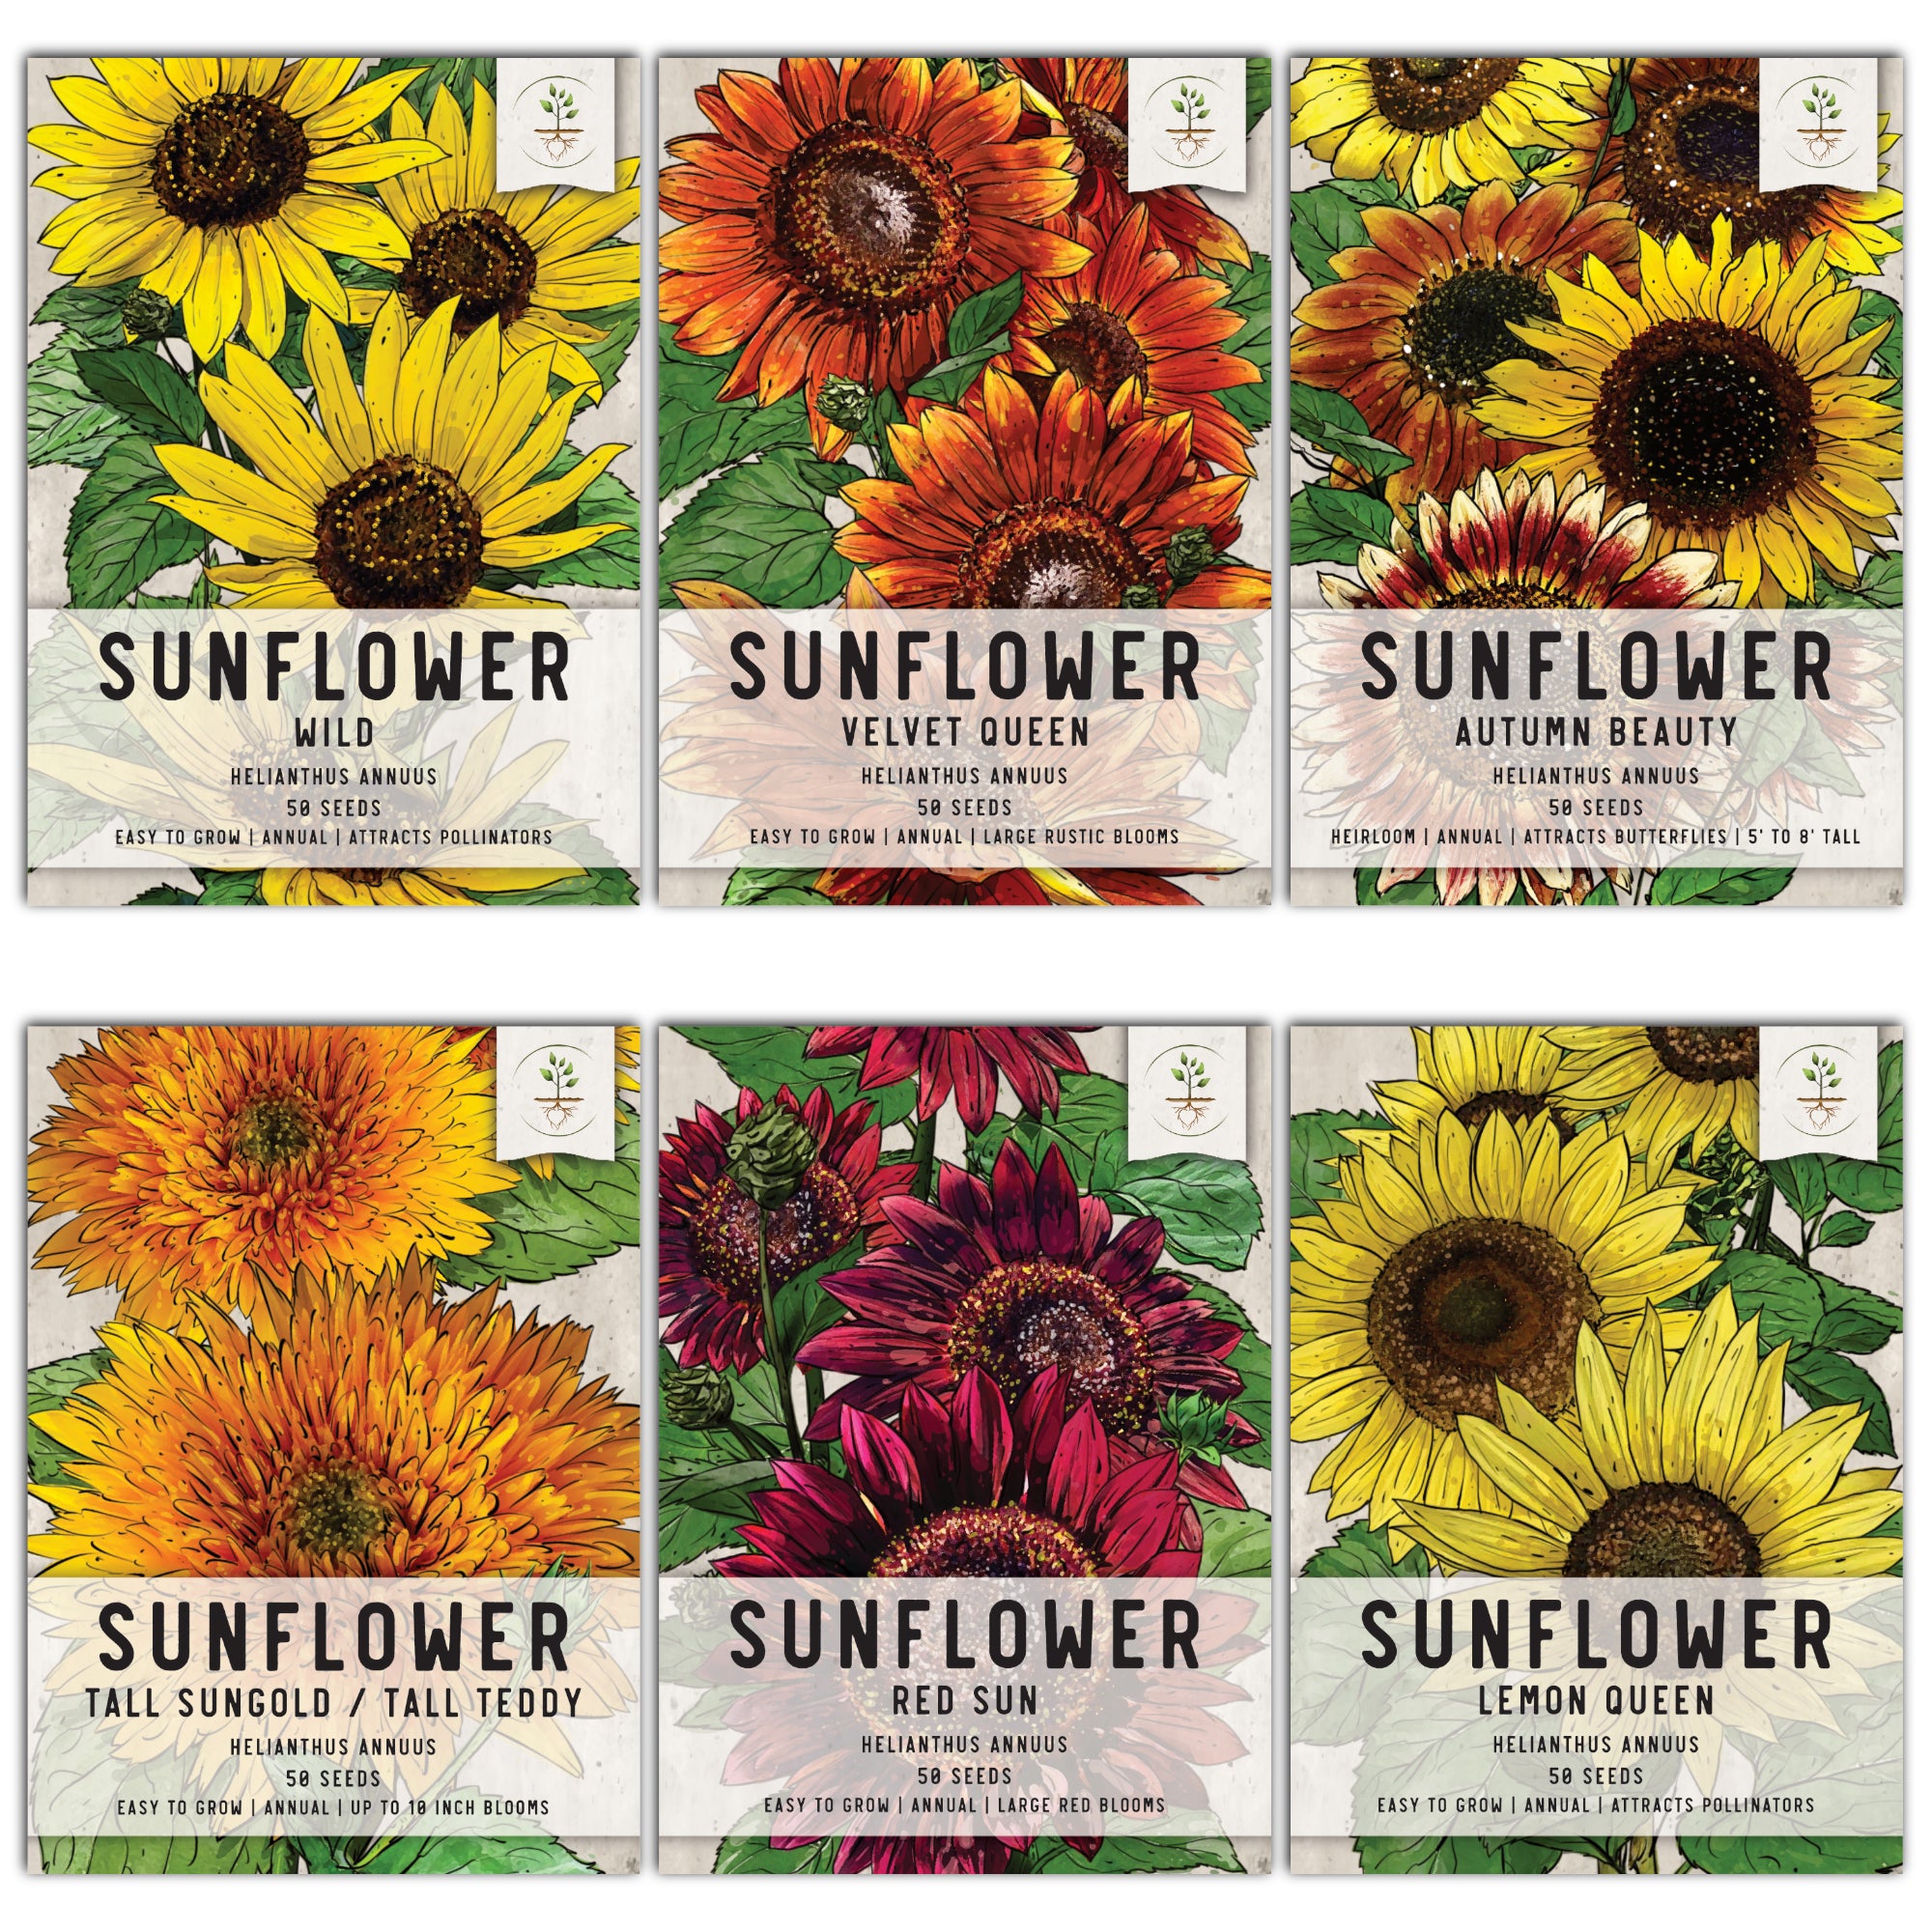 Annual Cut Flower Mixture Seed Packet